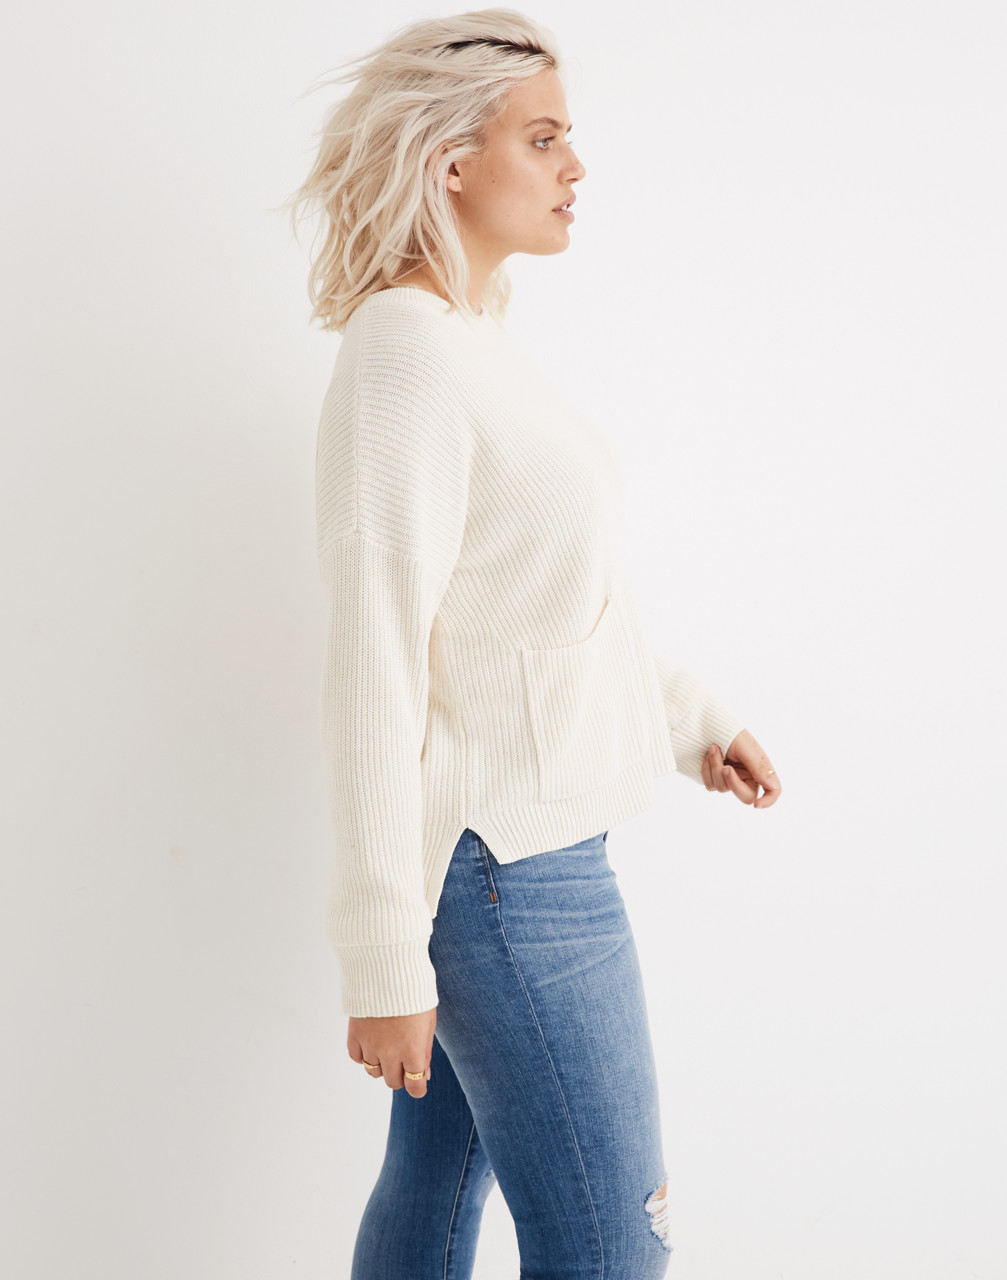 Patch Pocket Pullover Sweater in bright ivory image 1